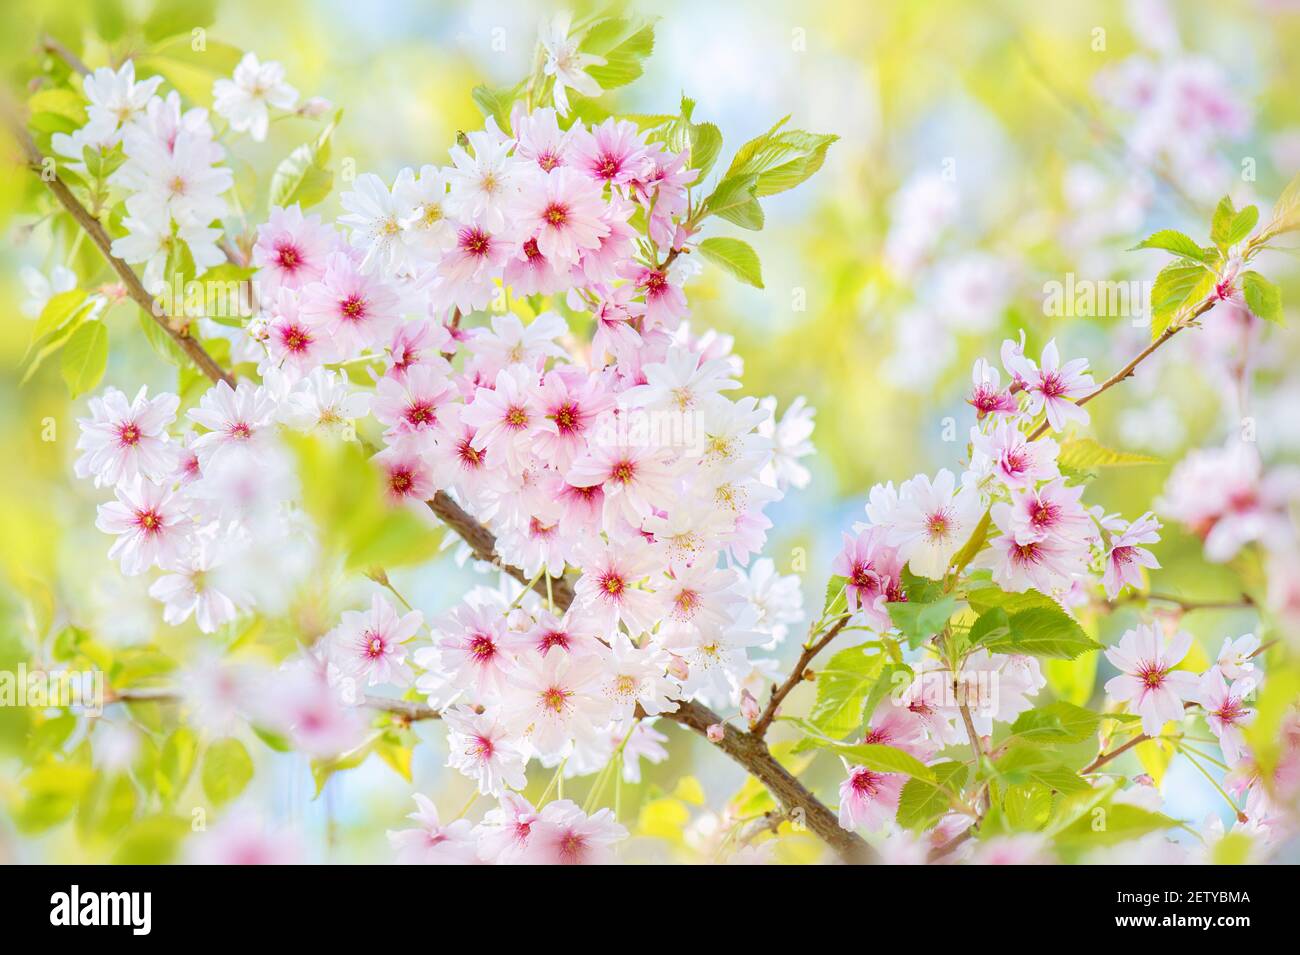 A beautiful close-up of Japanese cherry Spring blossom with blue sky and clouds visible through the branches on a bright day. ‘Sense of wellbeing’. Stock Photo